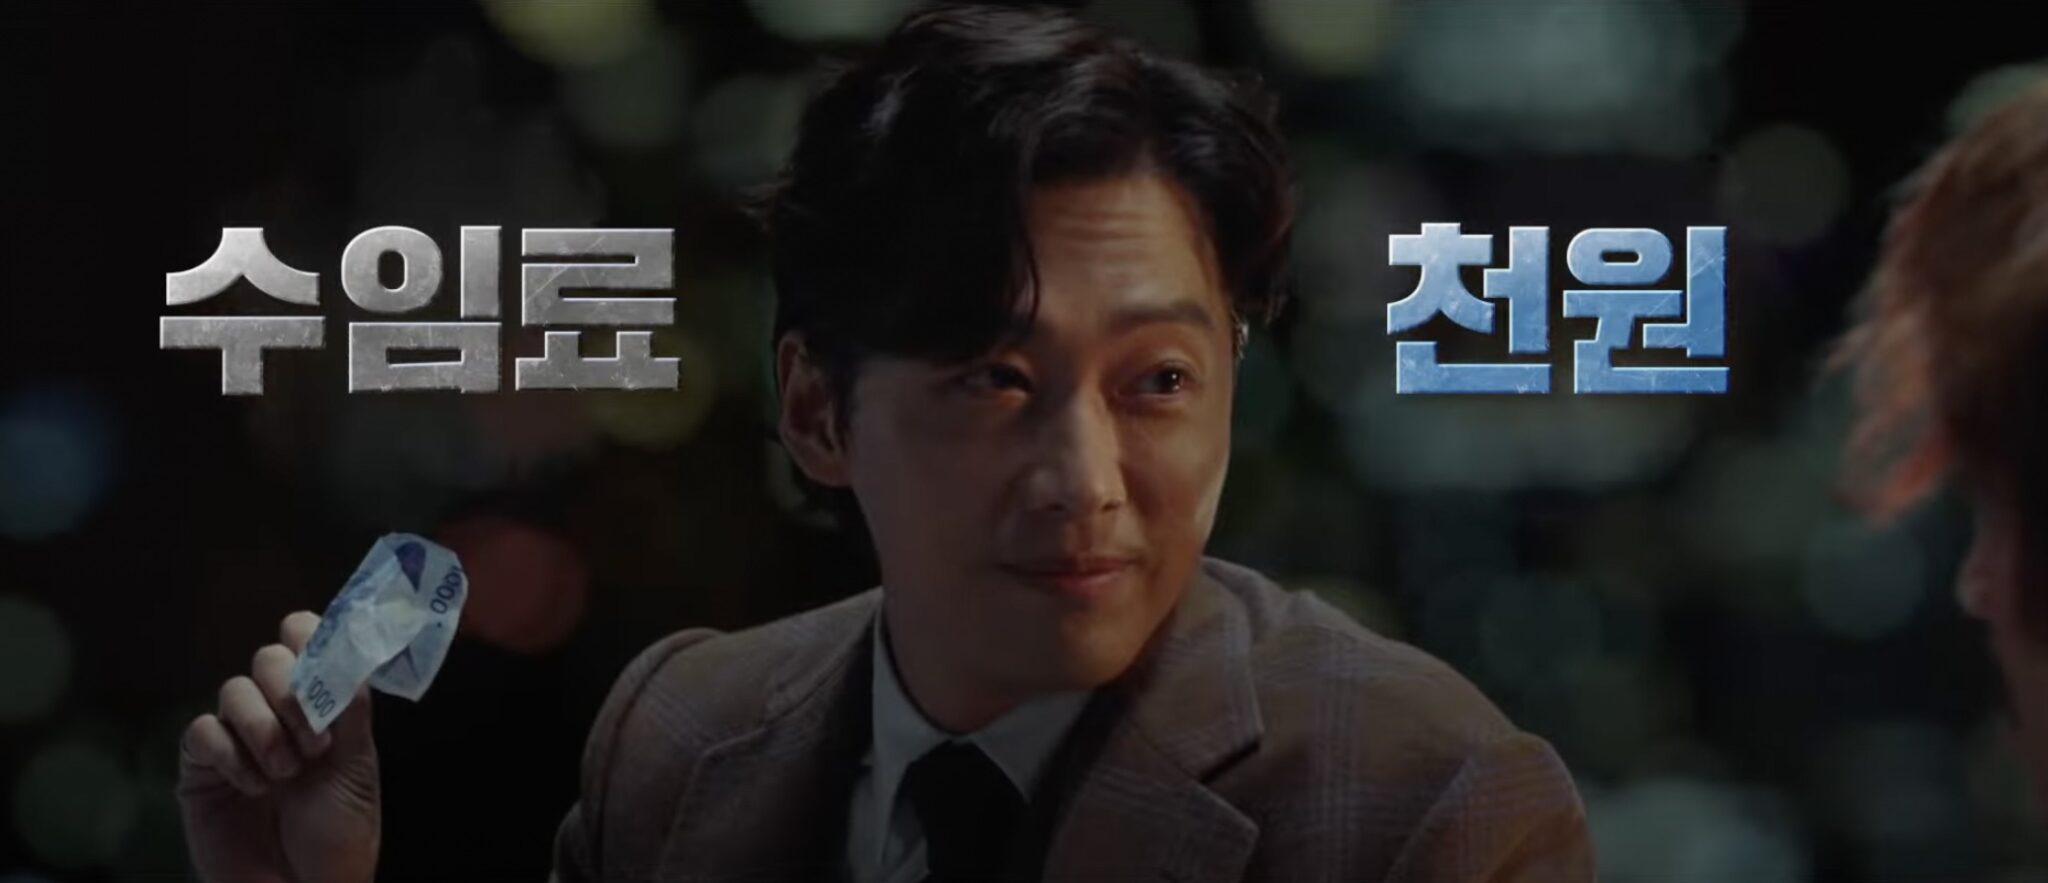 Namgoong Min fights for affordable justice in One Dollar Lawyer